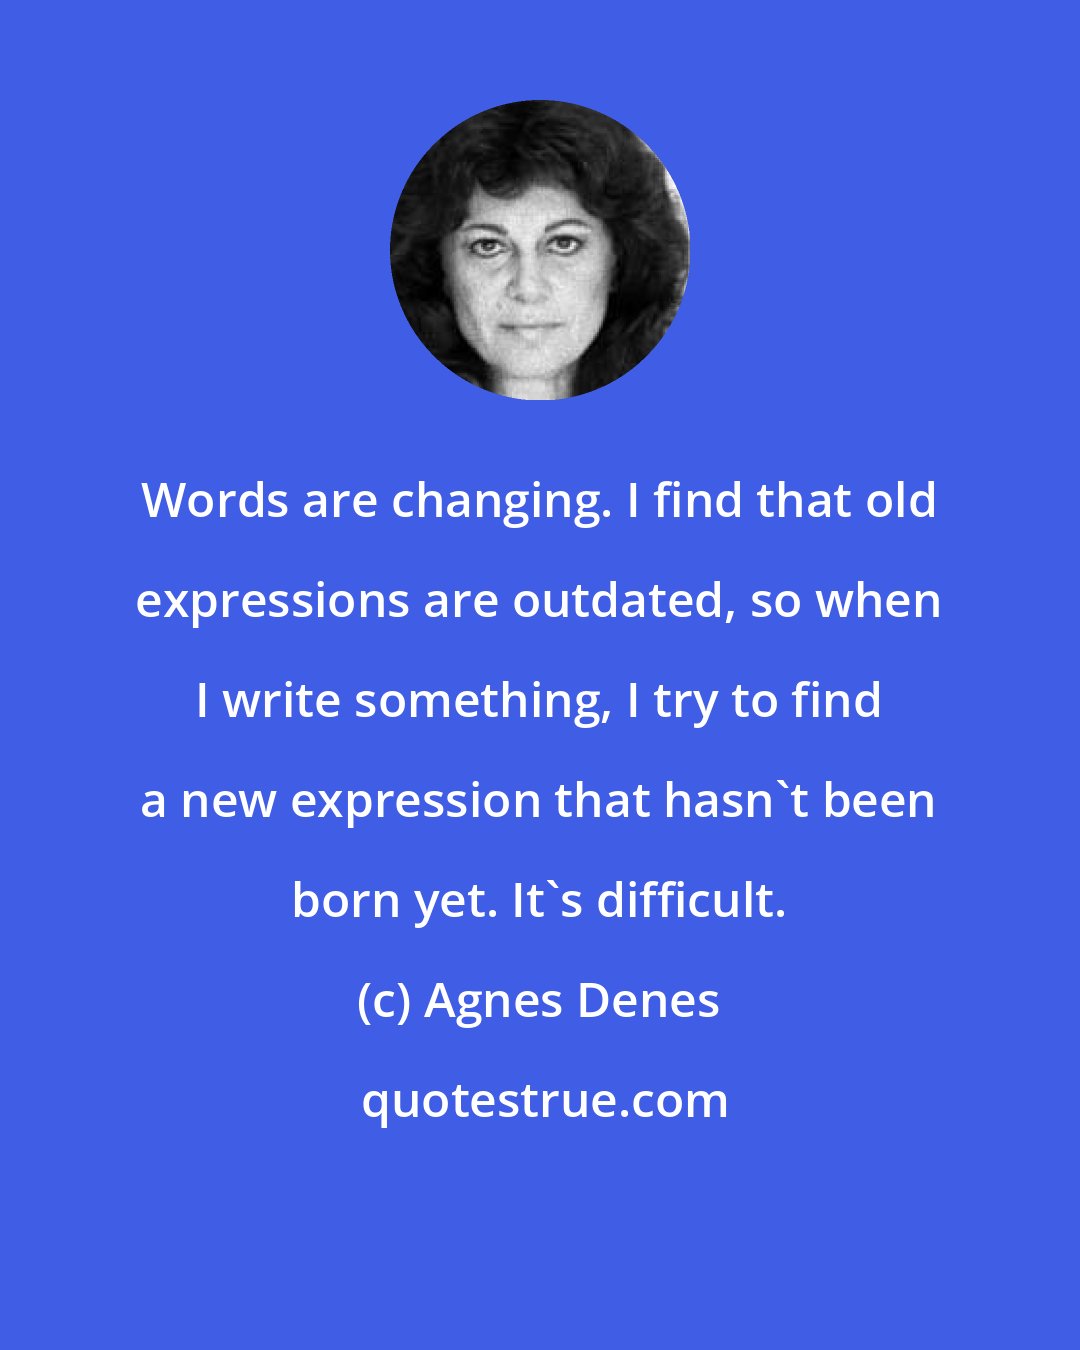 Agnes Denes: Words are changing. I find that old expressions are outdated, so when I write something, I try to find a new expression that hasn't been born yet. It's difficult.